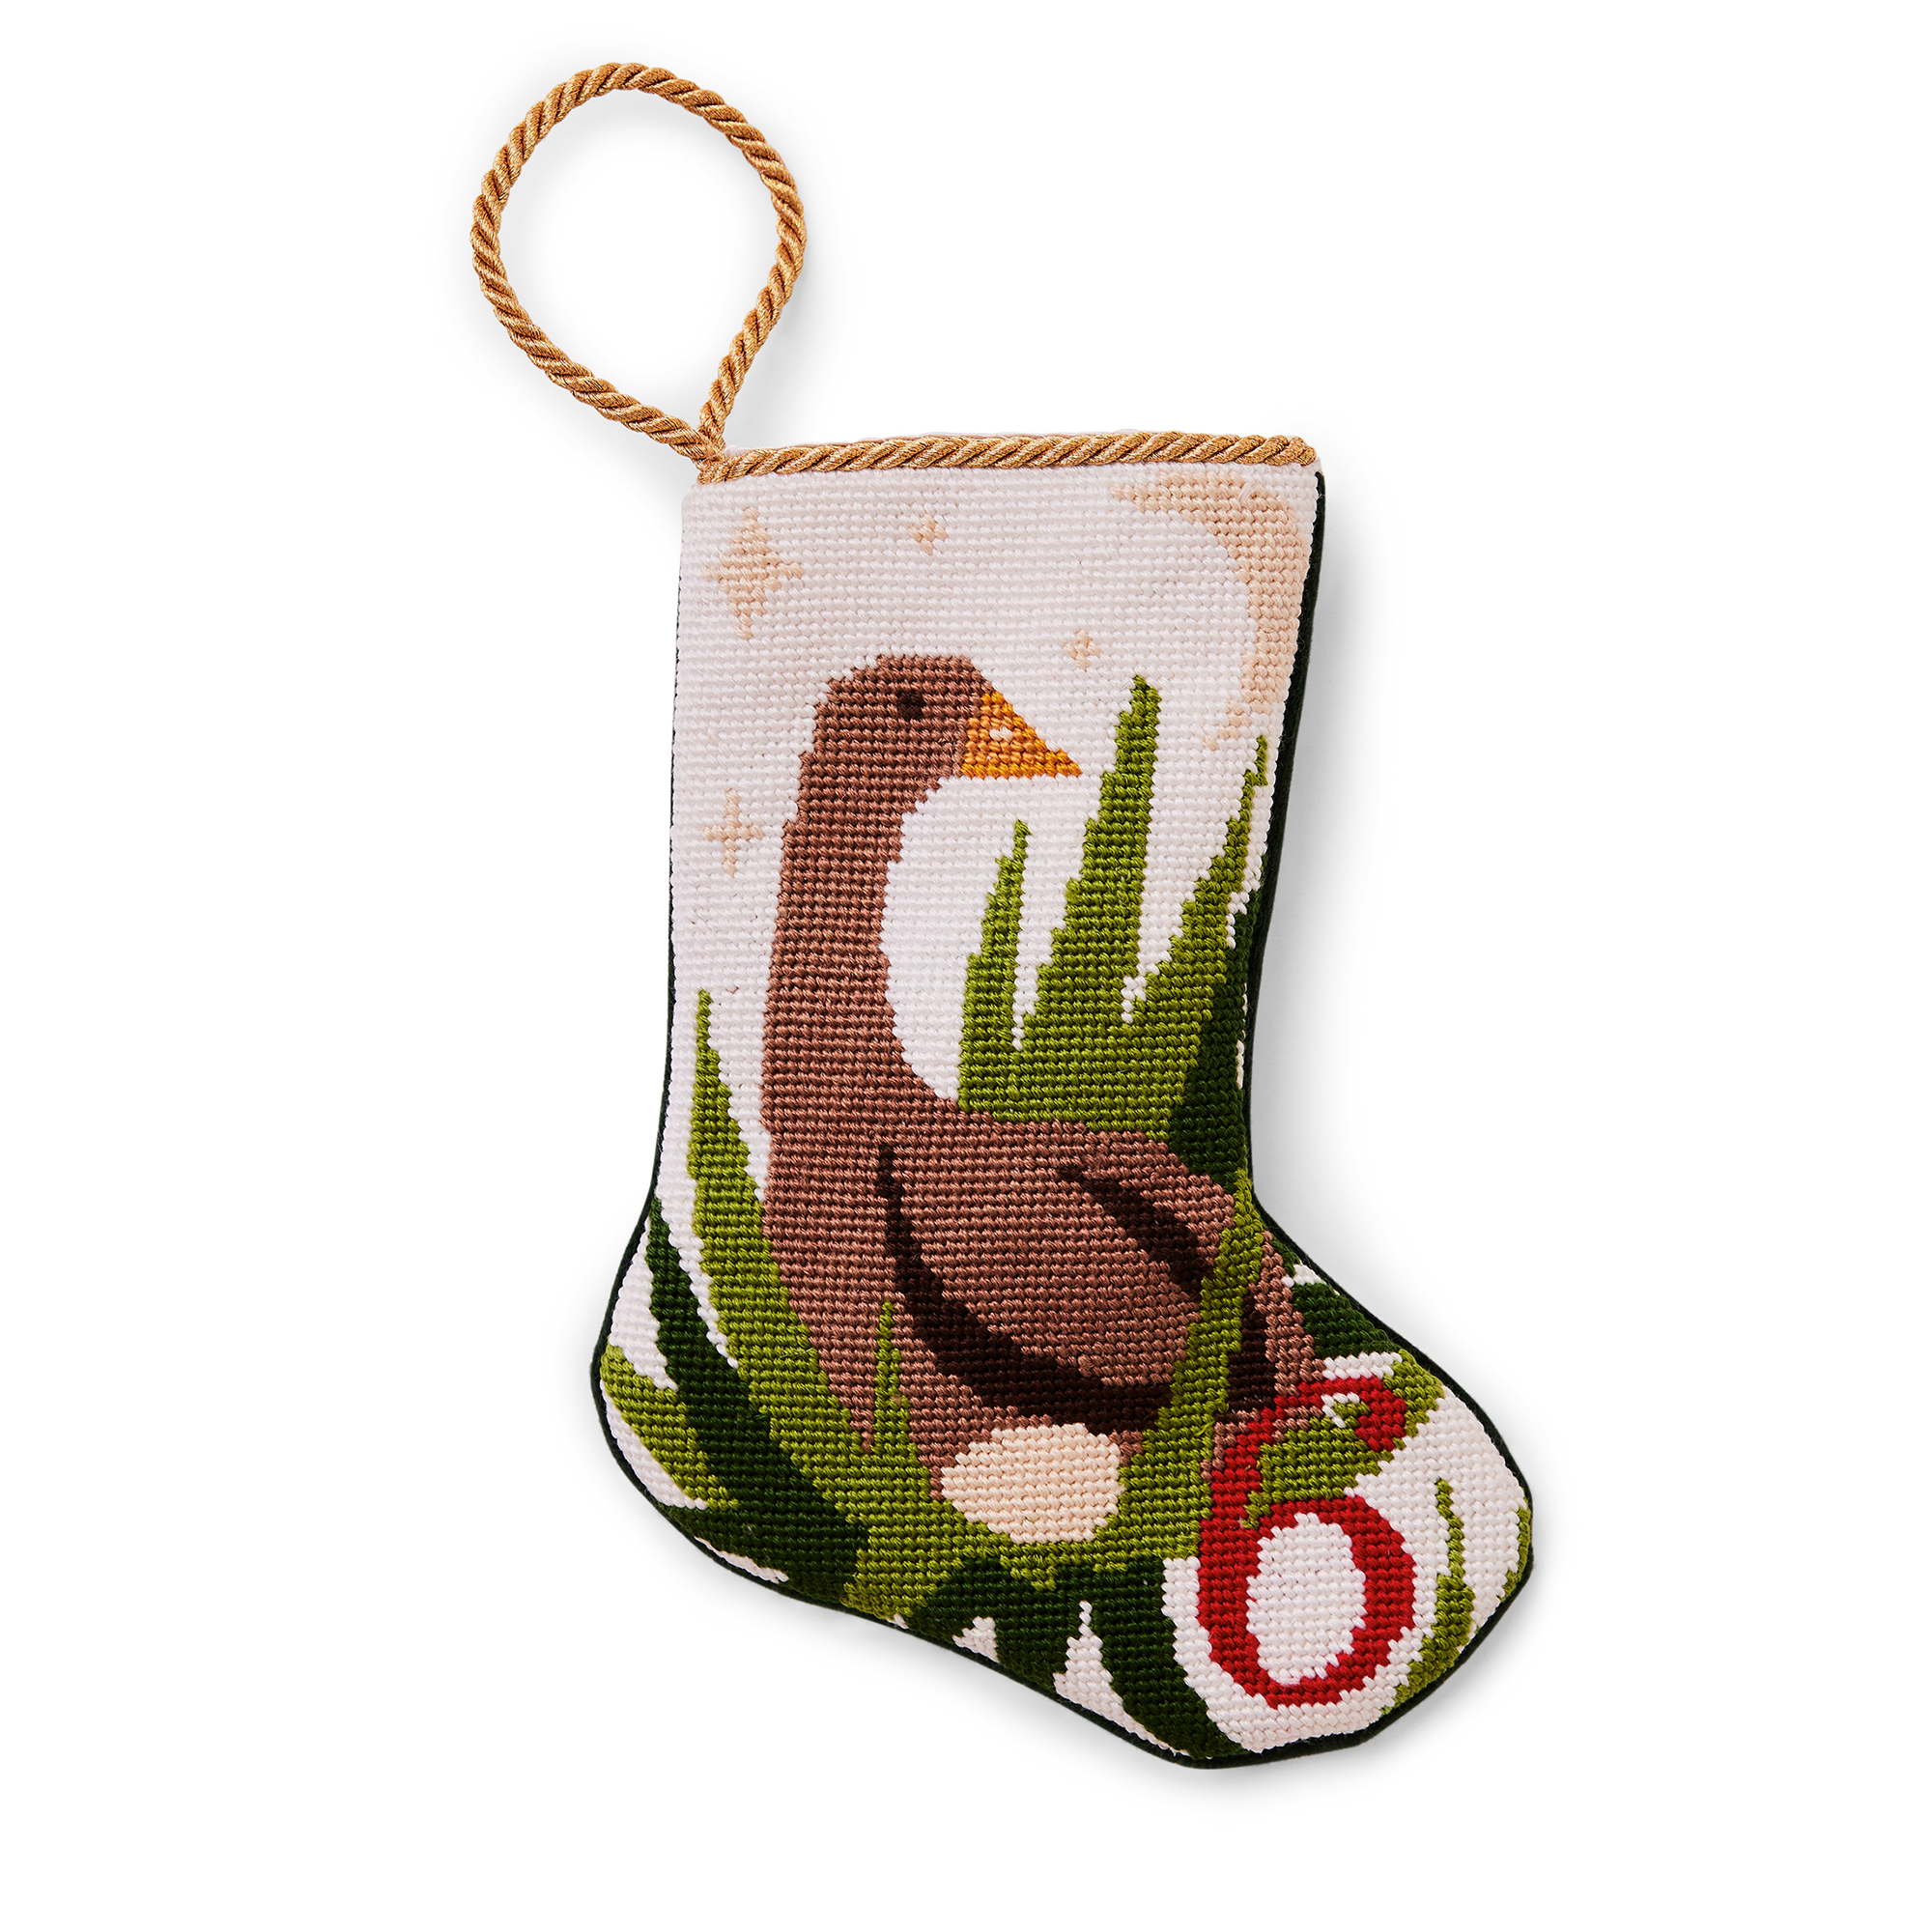 An intricately designed mini needlepoint stocking featuring the '6 Geese a Laying' from the classic Christmas carol. This festive decoration adds a traditional and charming touch to your holiday decor. Perfect as tree ornaments, place settings, or for holding special gifts.